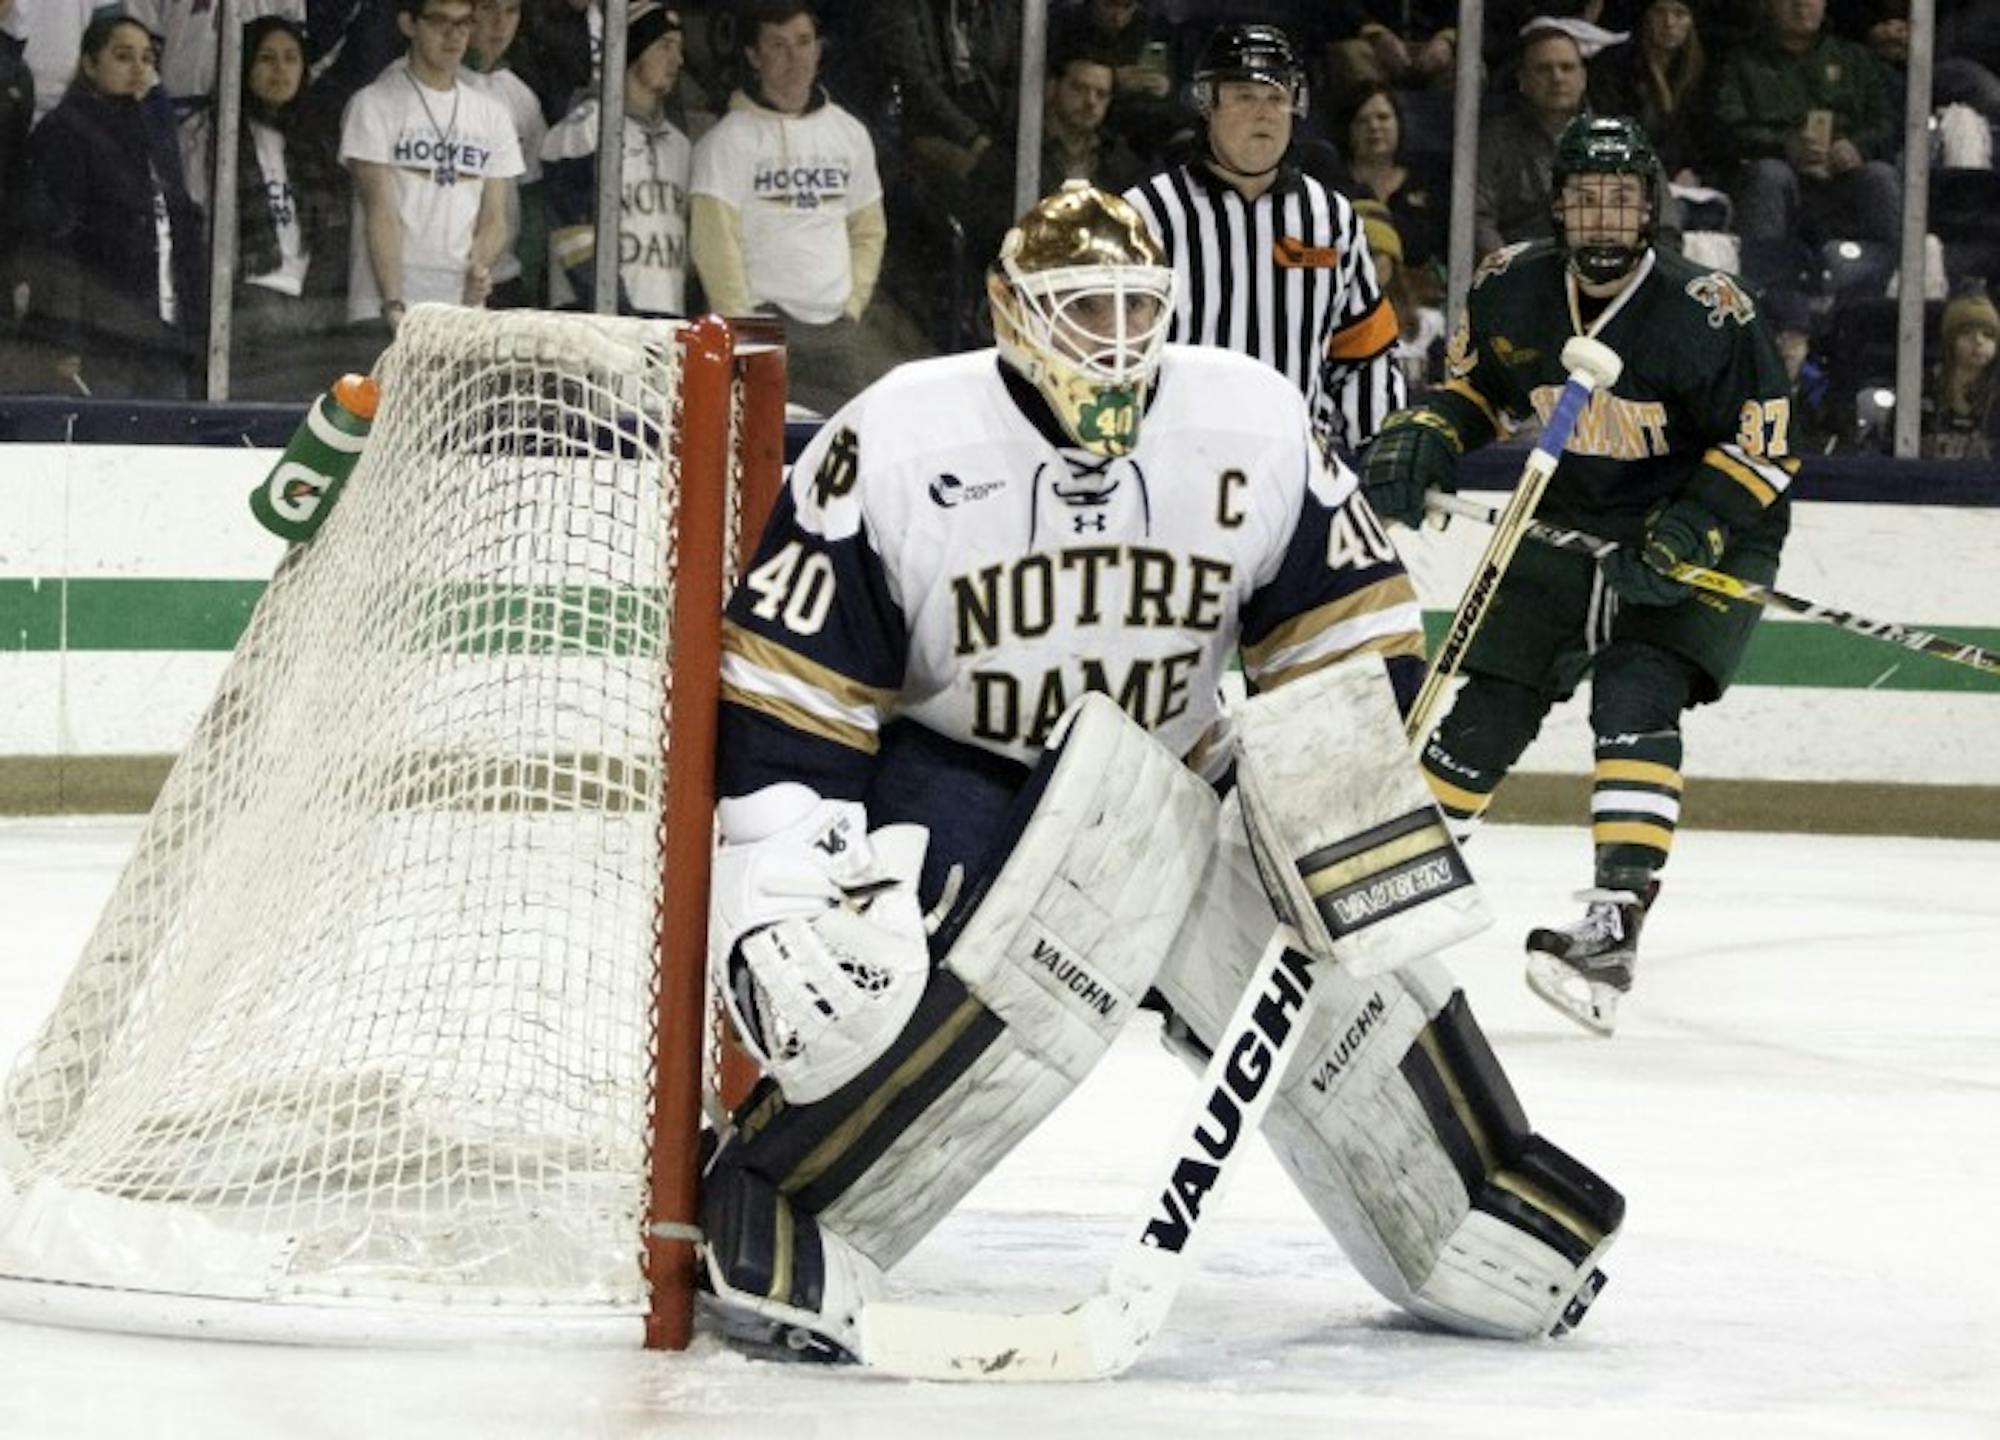 Irish junior goalie Cal Petersen mans his post in goal during Notre Dame’s 4-1 win over Vermont on Feb. 4 at Compton Family Ice Arena.